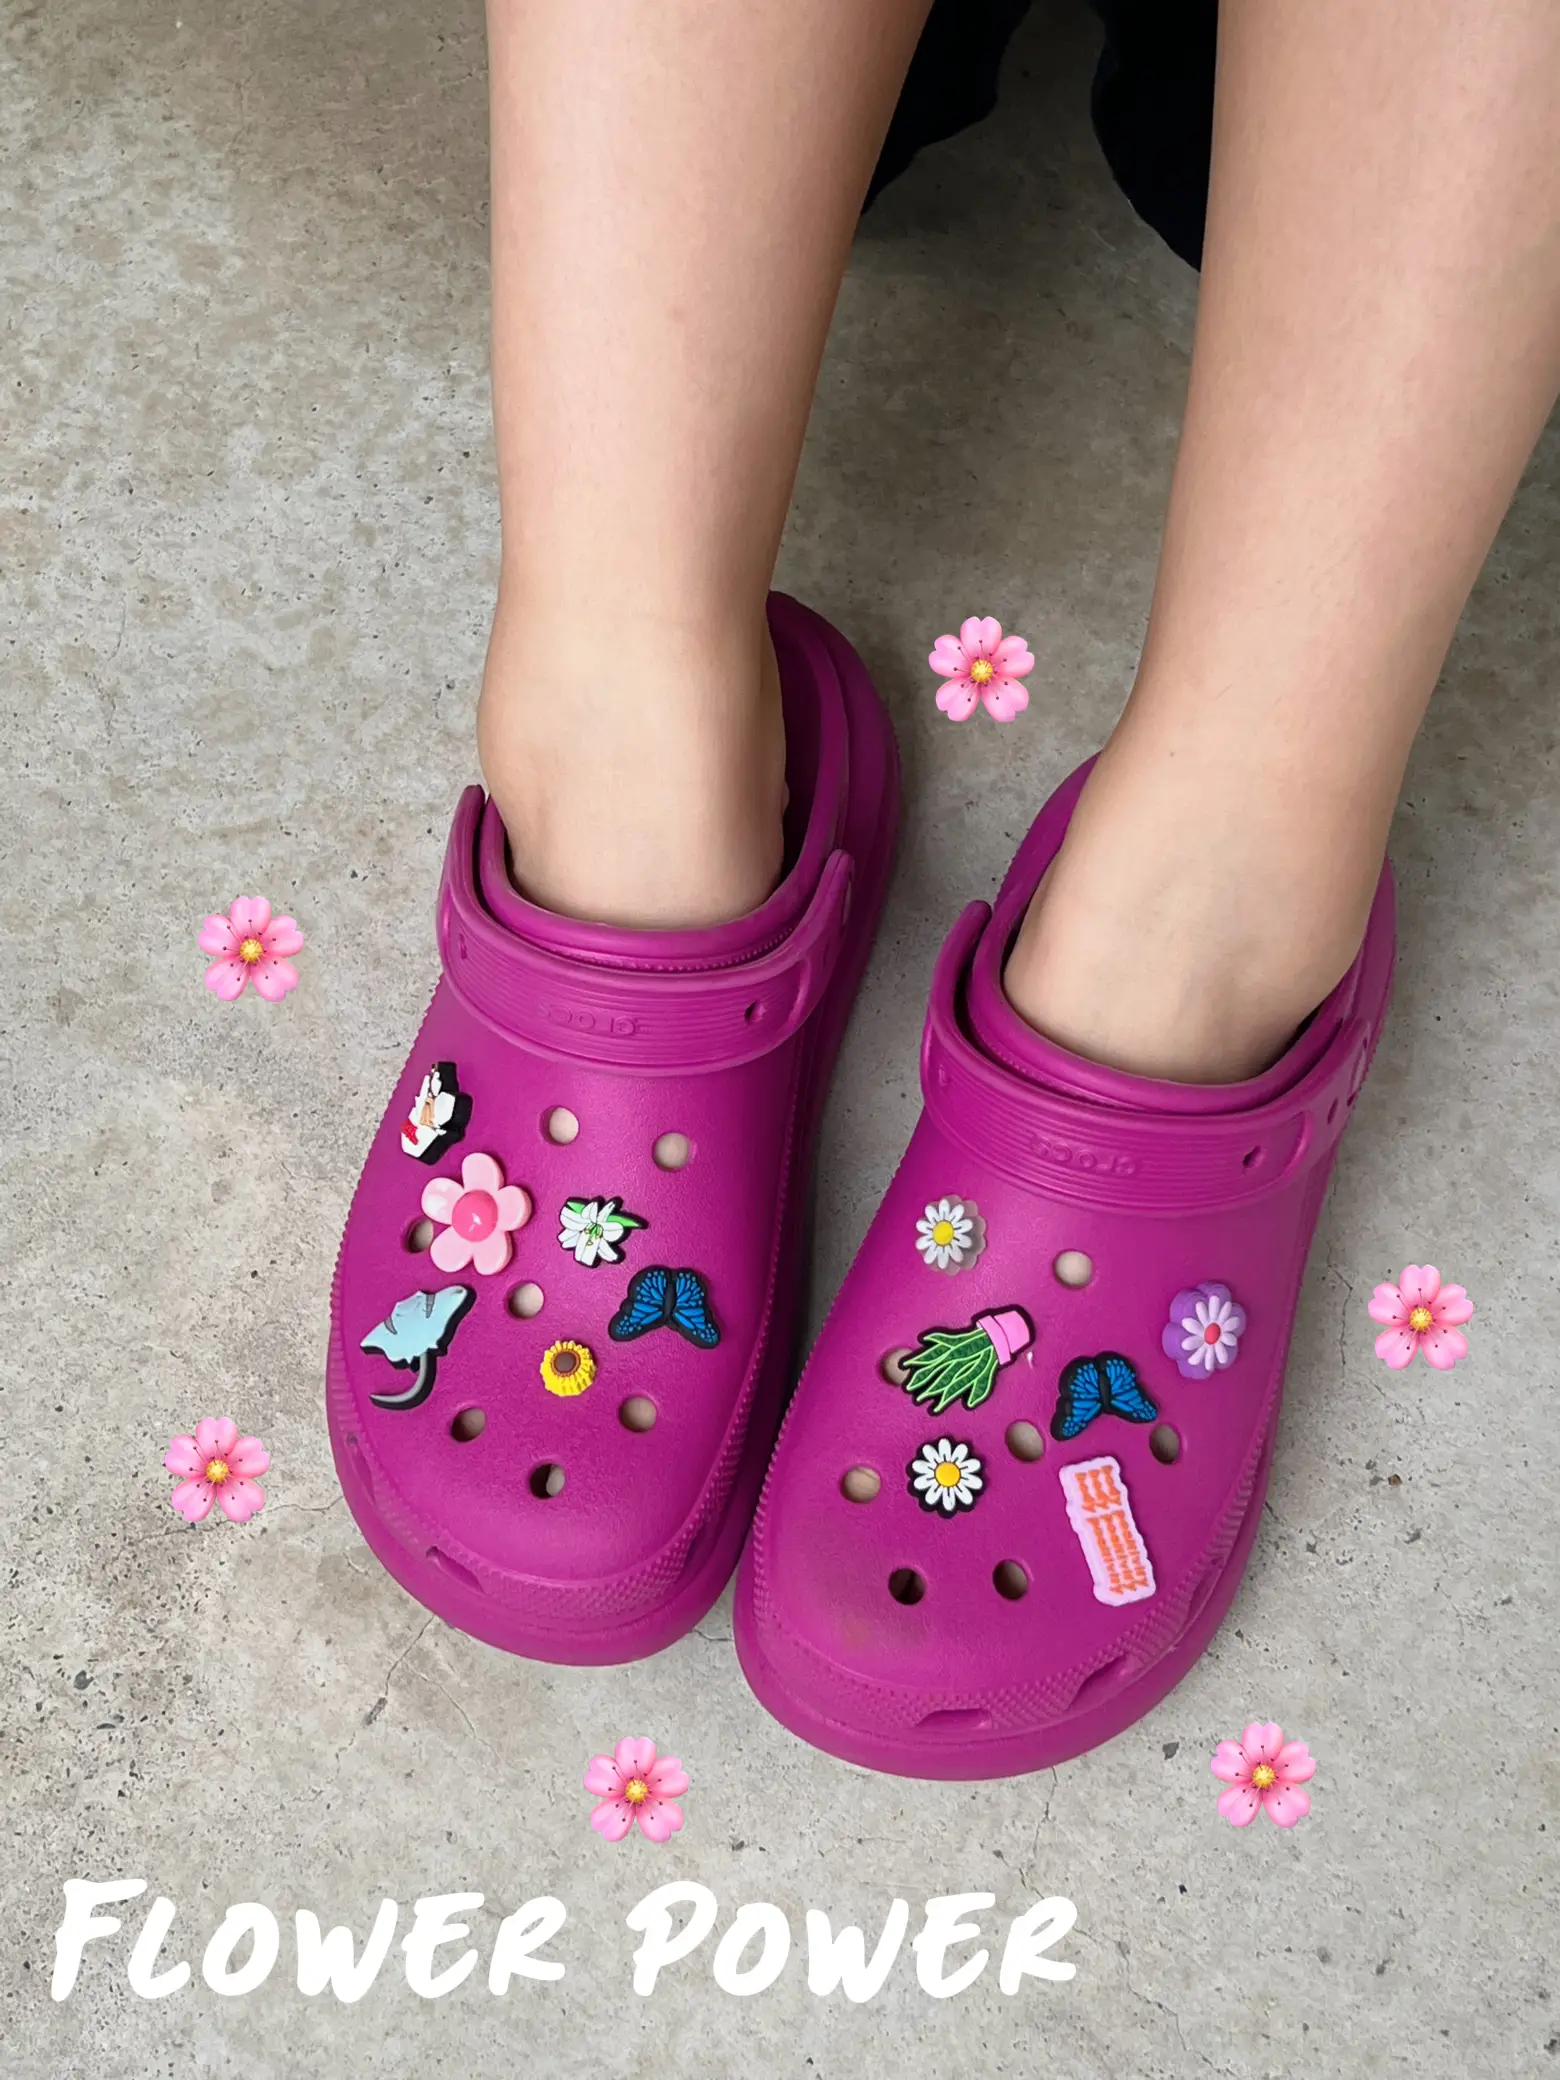 one thing about me is i'll wear platform crocs with sanrio jibbitz